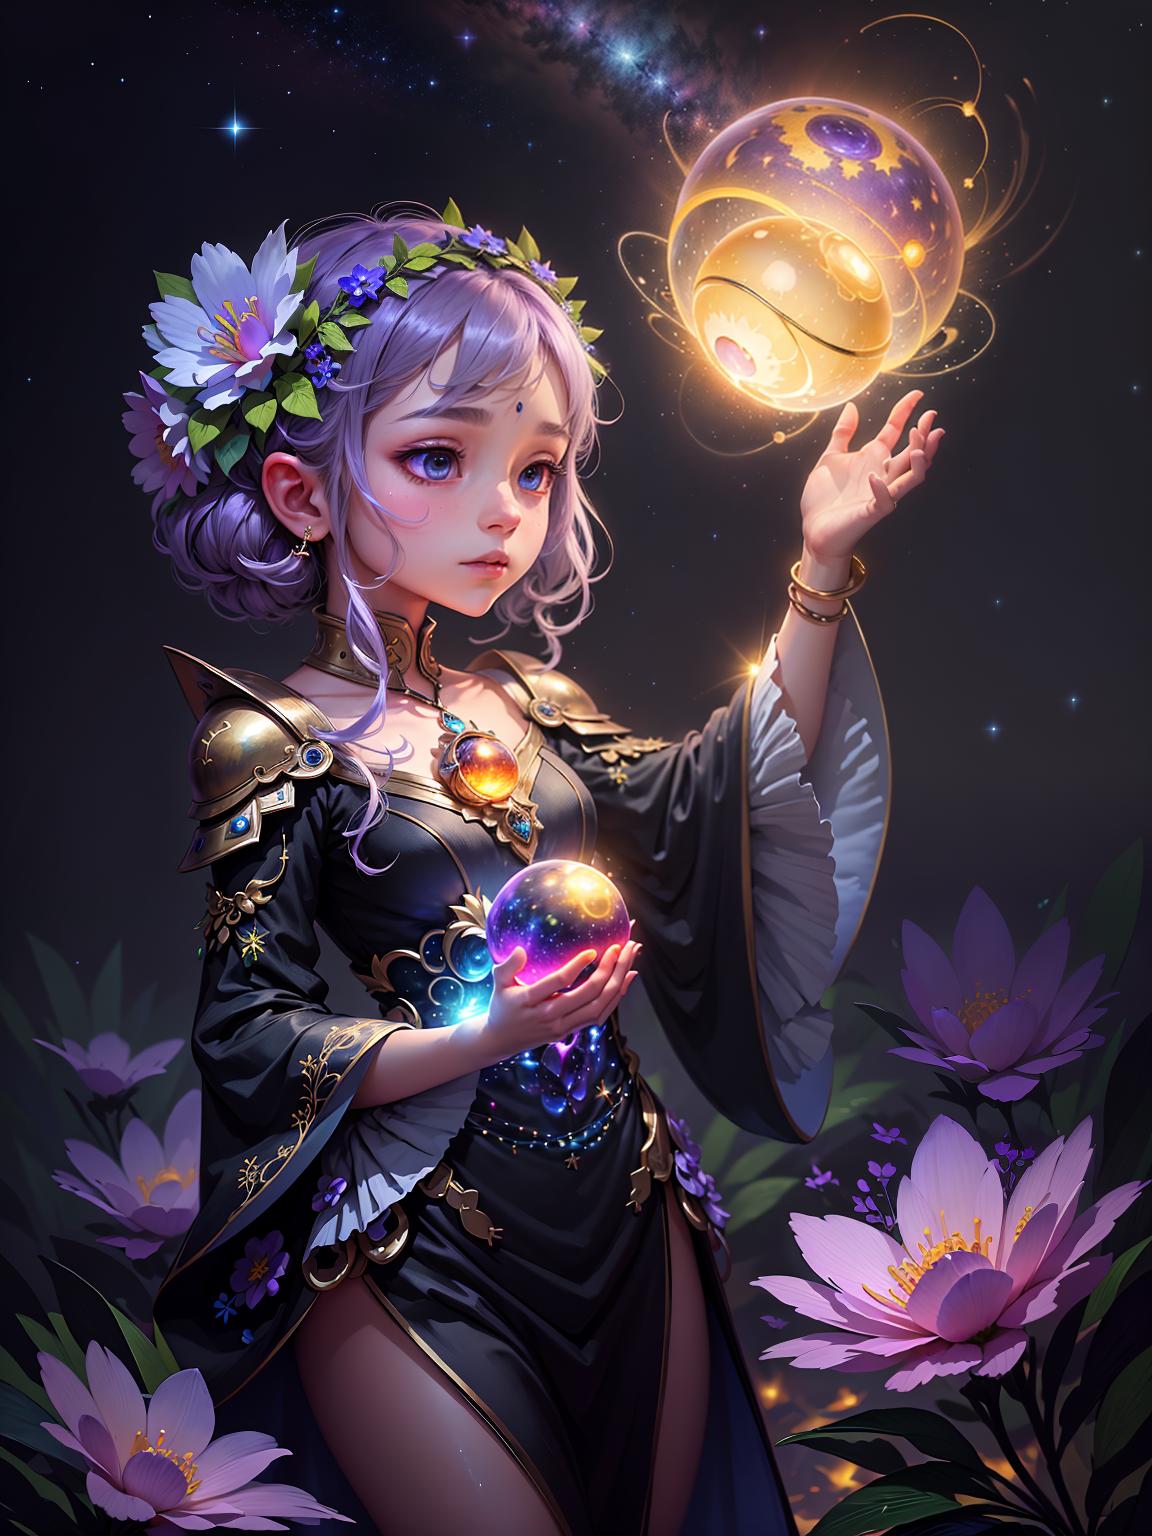  master piece, best quality, ultra detailed, highres, 4k.8k, An extraterrestrial being with a vibrant personality., Observing the stars while holding a cosmic flower., Inquisitive and filled with wonder., BREAK A peculiar encounter in a galactic garden., A lush, otherworldly garden with bioluminescent flora., Cosmic flower, floating crystals, and a glowing orb., BREAK Serene and ethereal, with a hint of cosmic mystery., Soft glowing light and twinkling stars casting a magical aura., fun00d